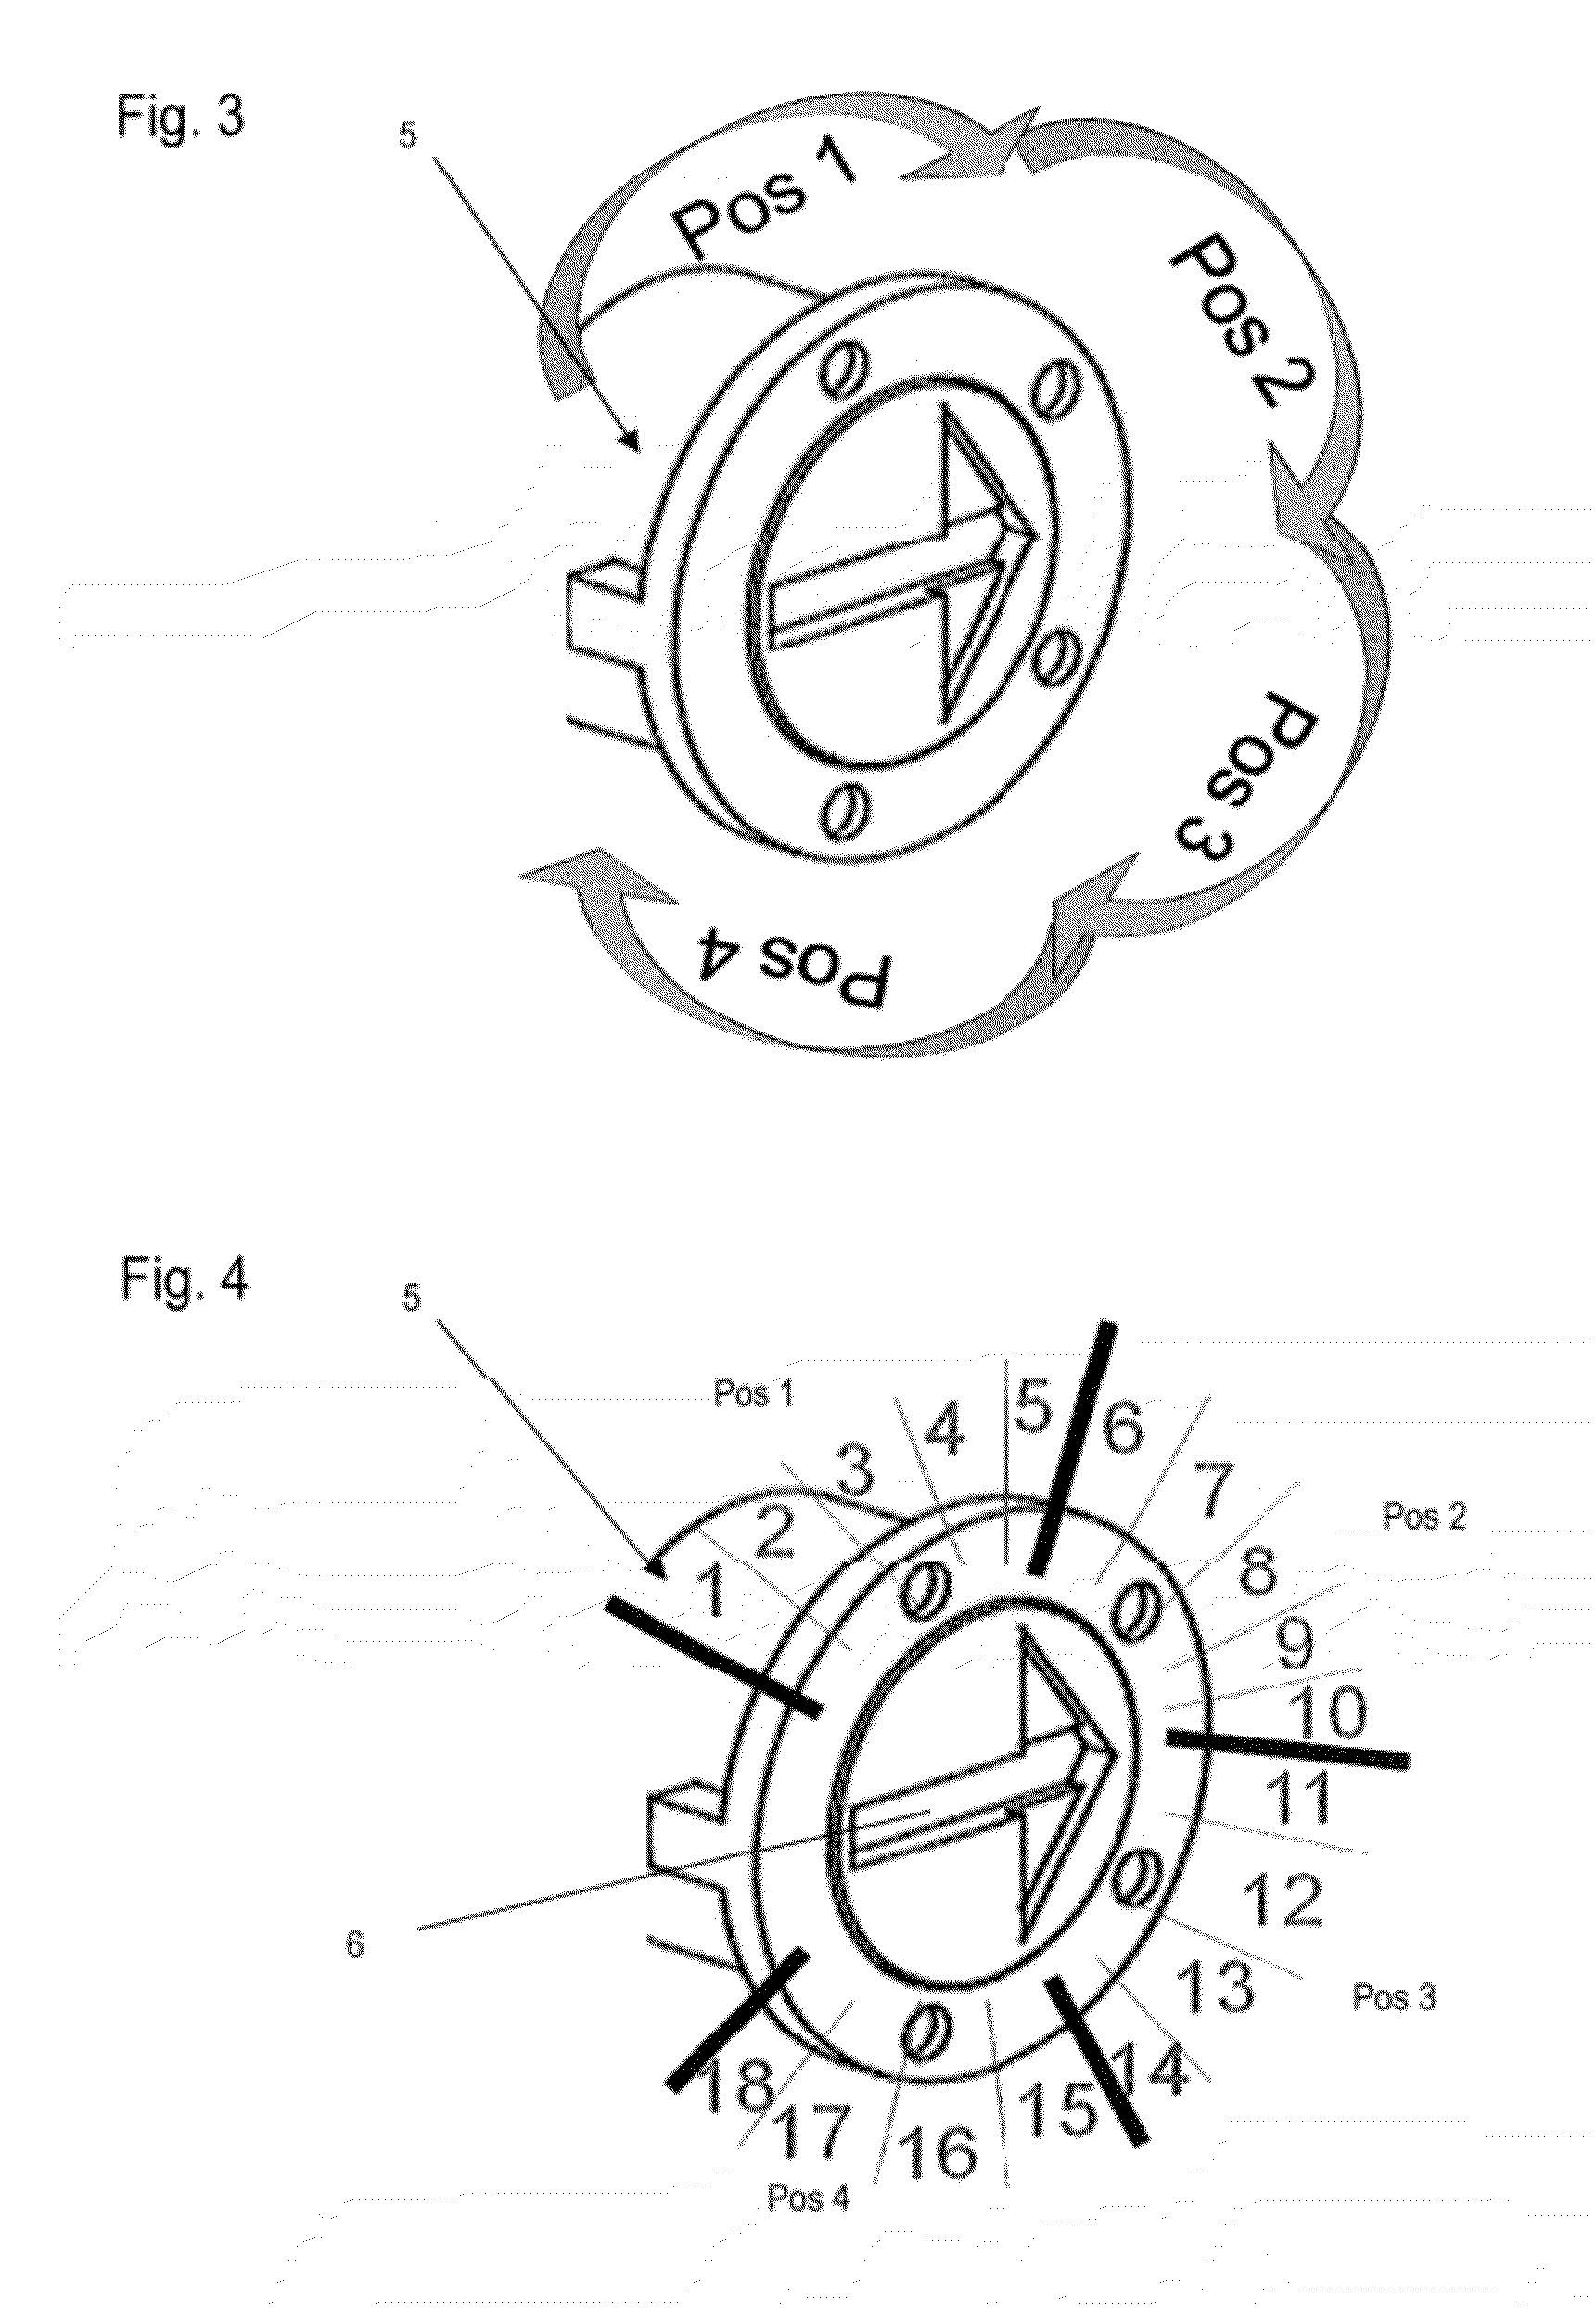 Hearing system with analogue control element